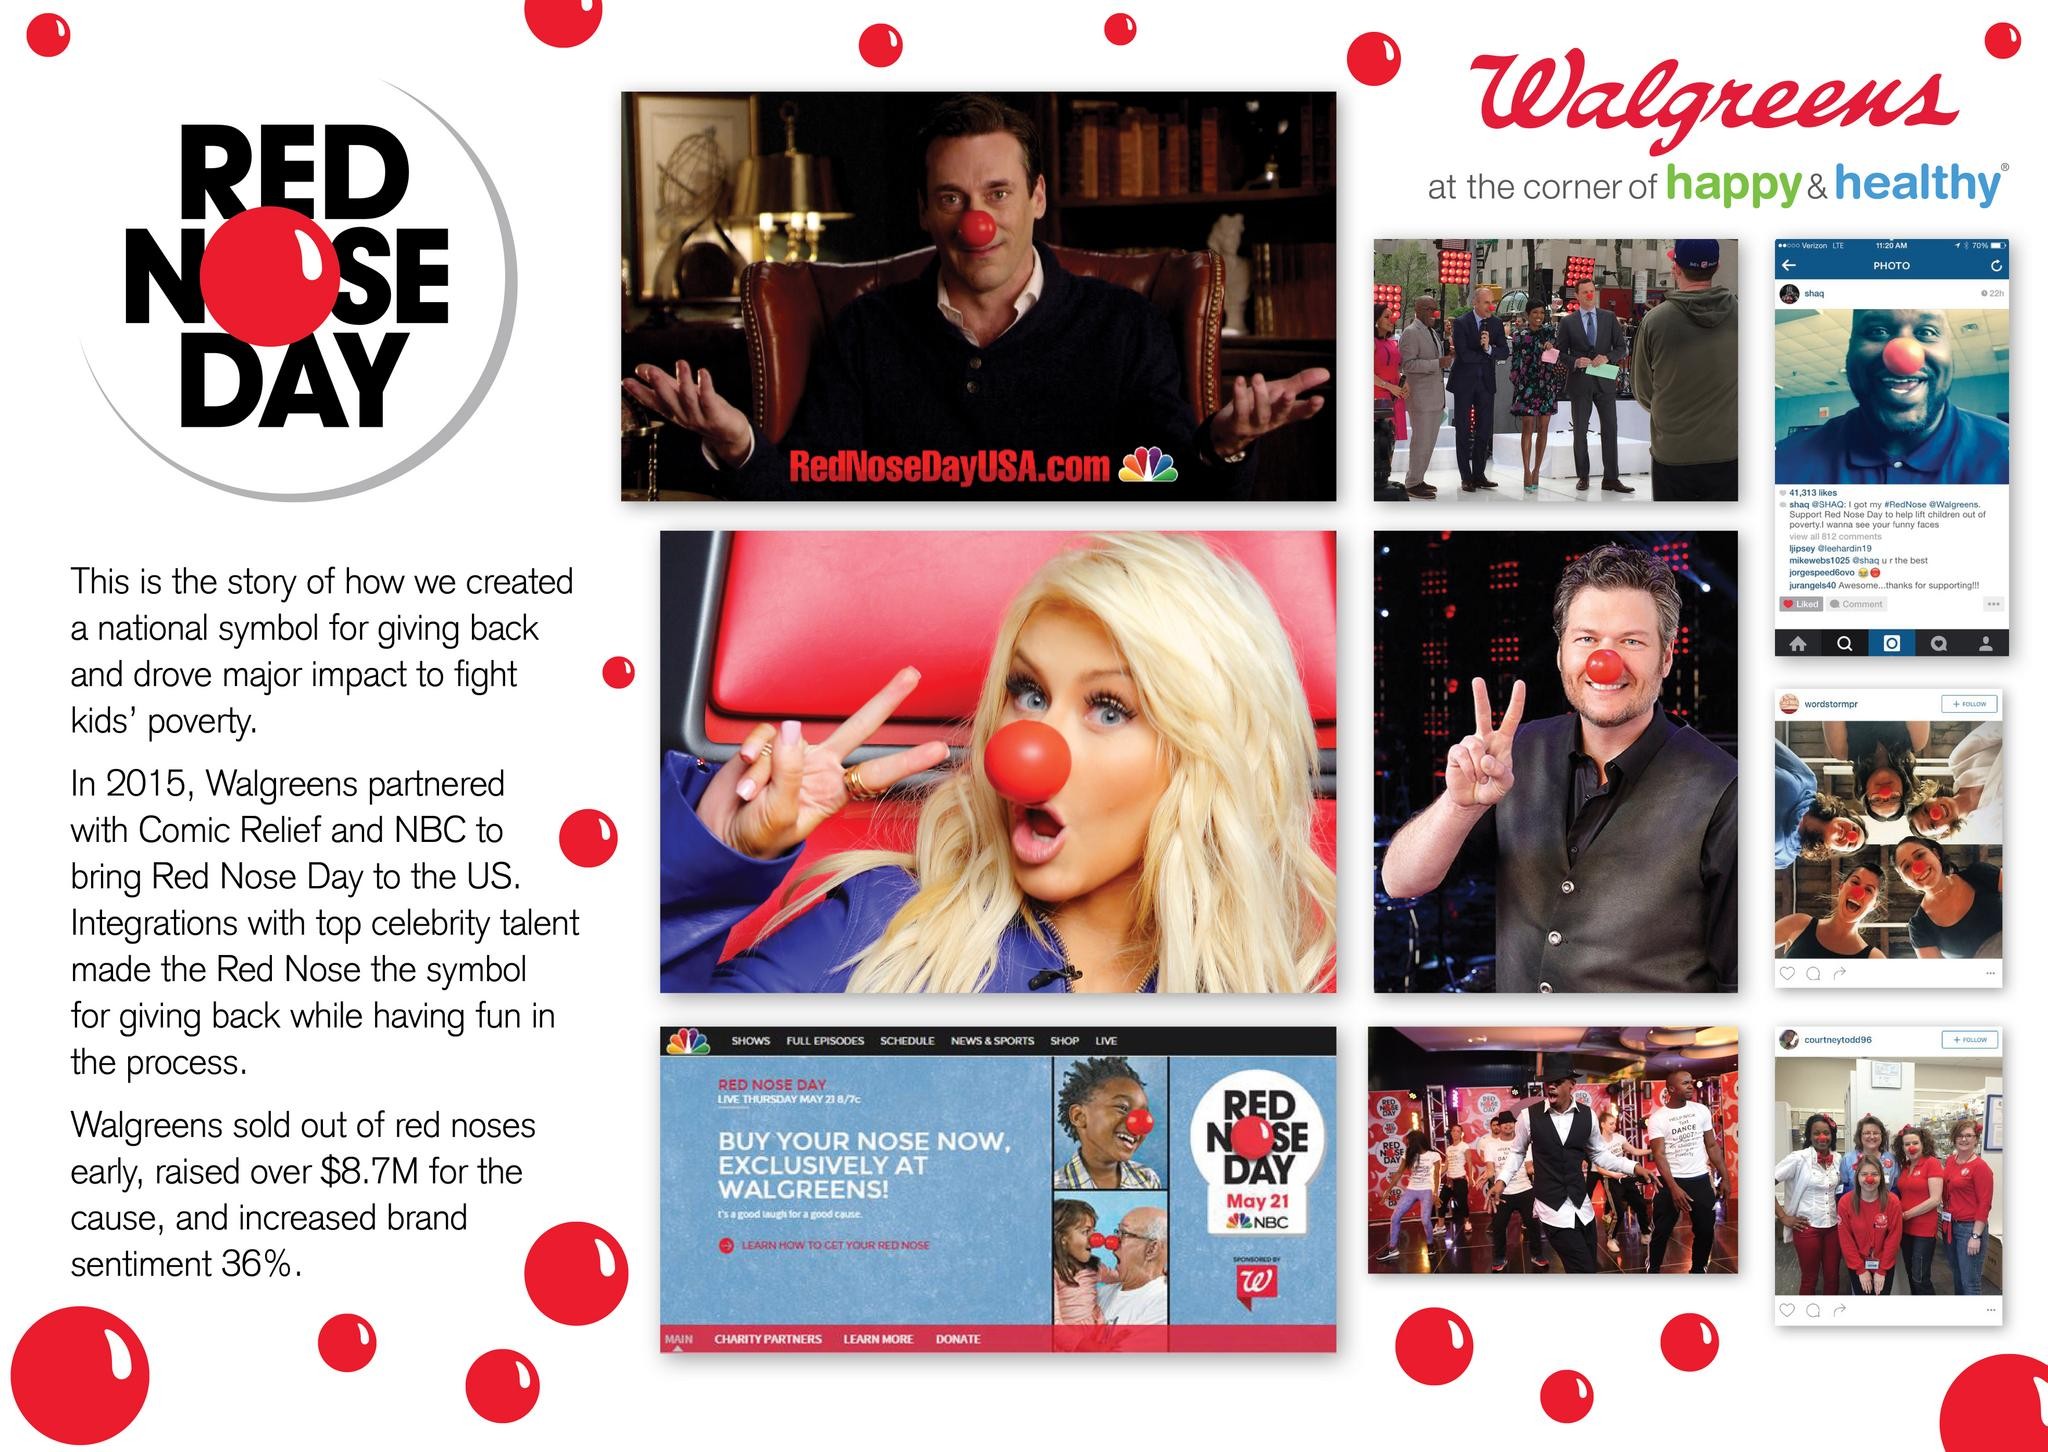 Walgreens Gives Back with Red Nose Day